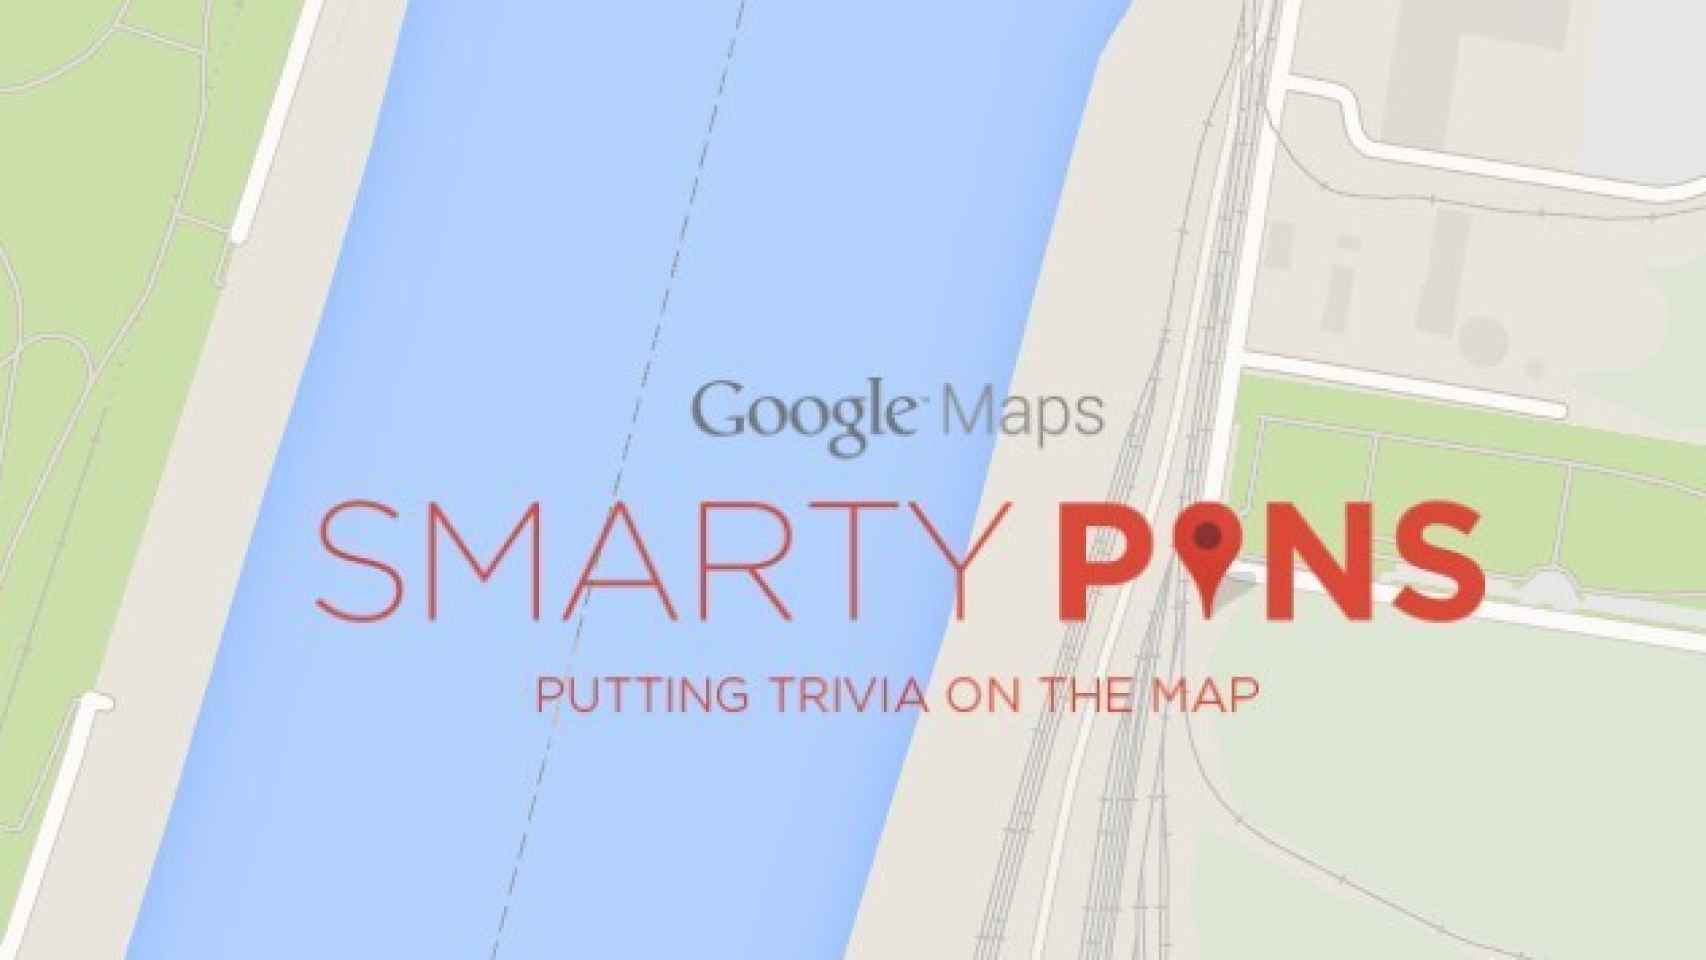 maps-smarty-pins-1